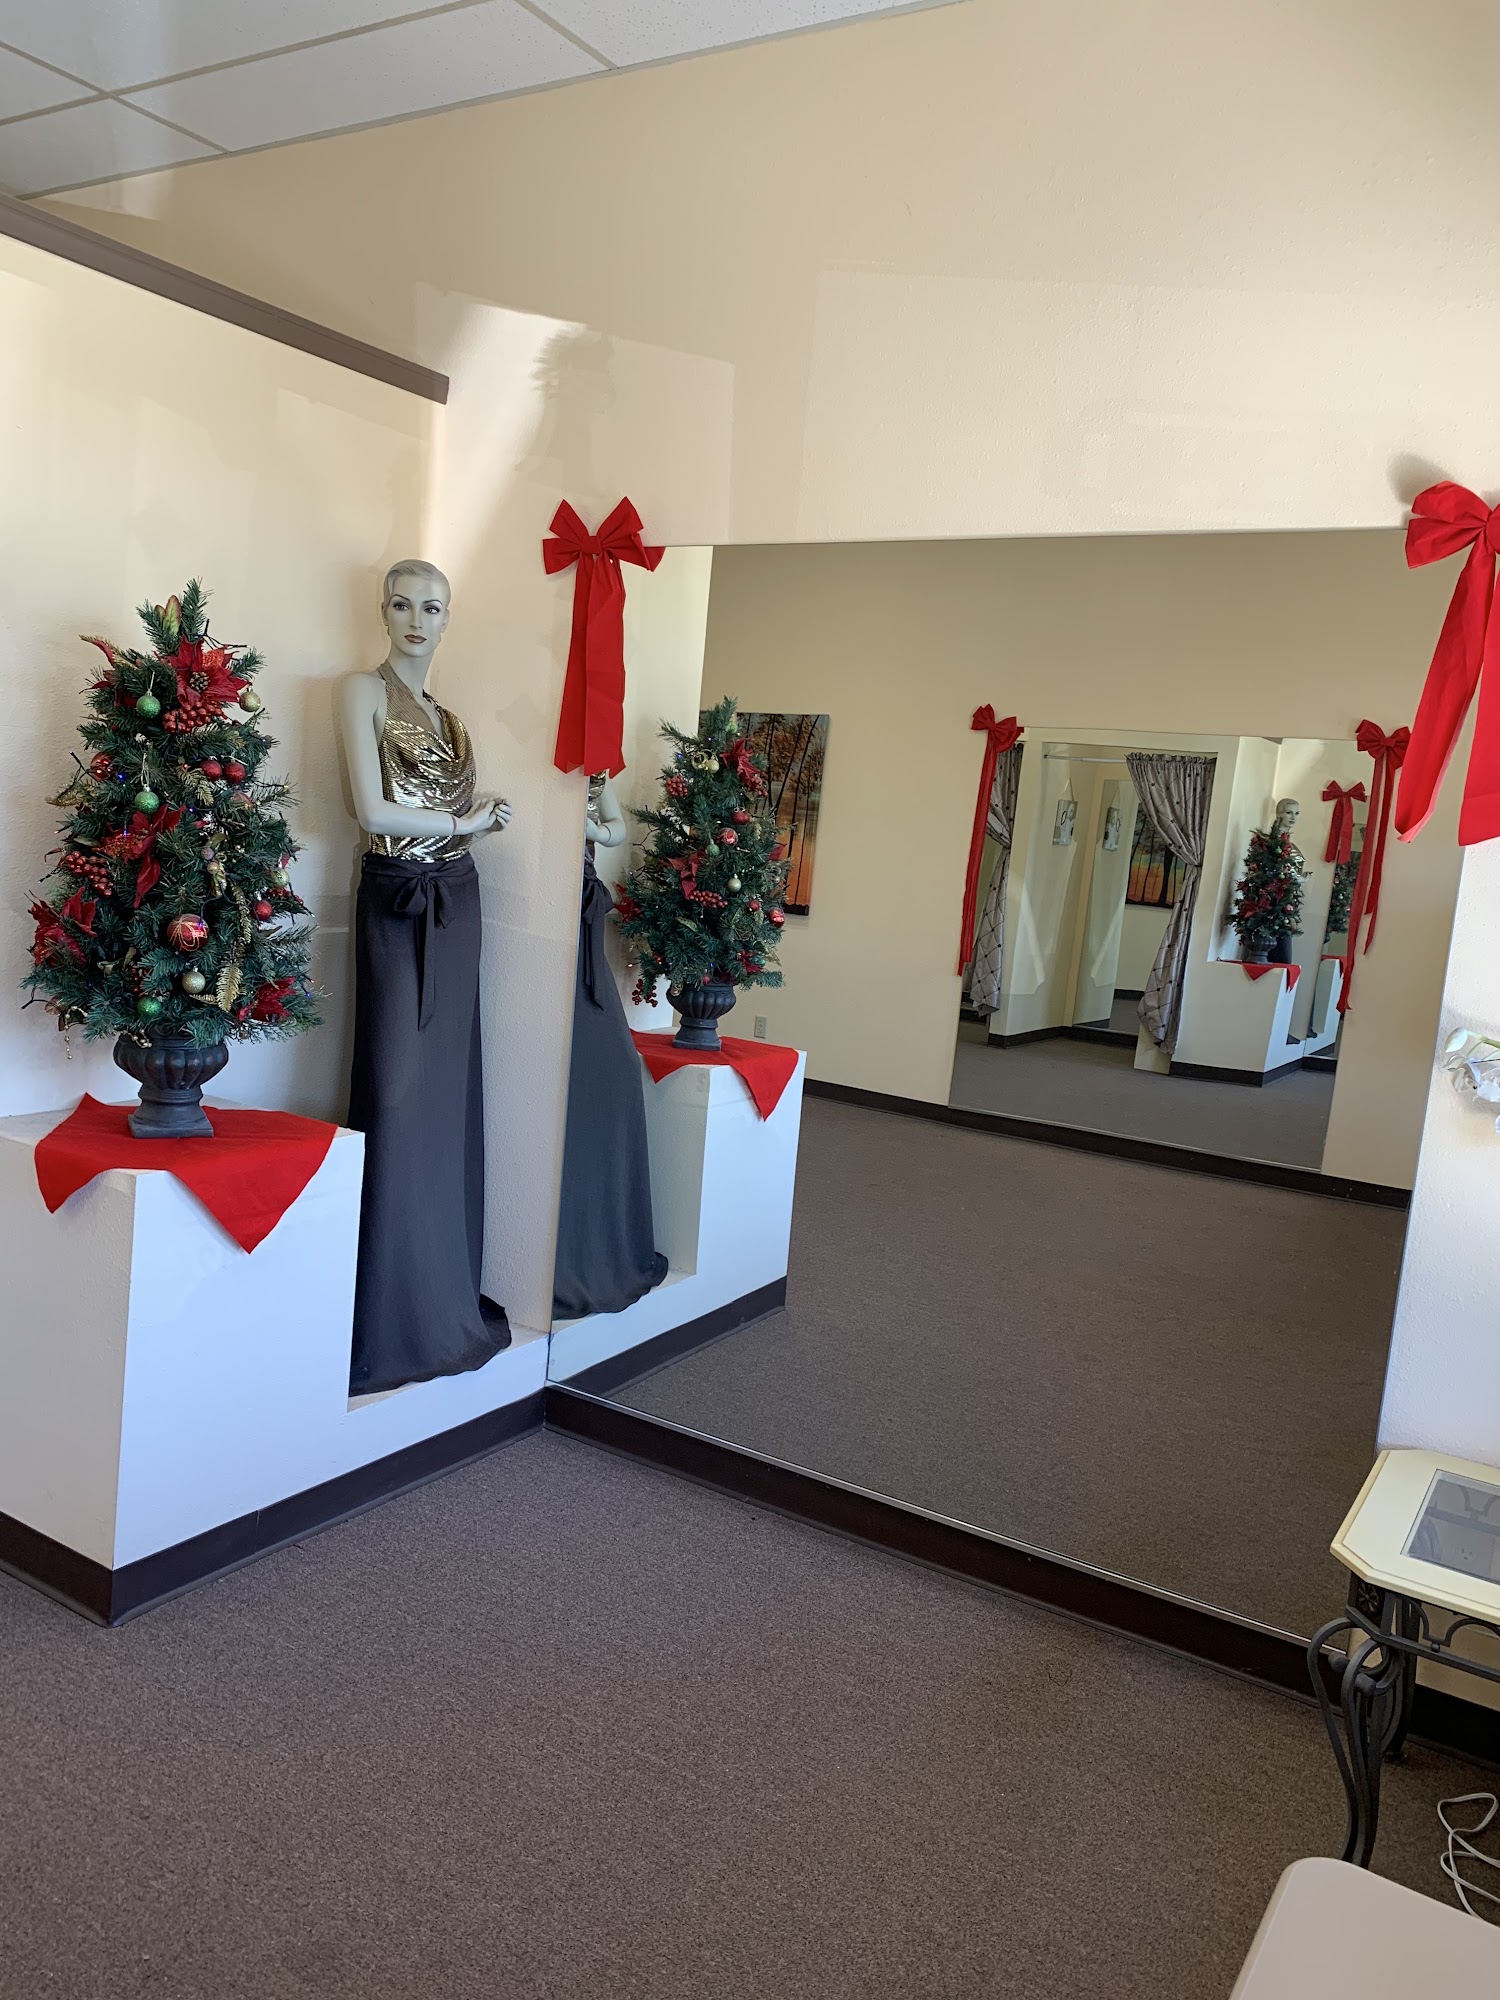 Fashion Alterations and Tailoring Center